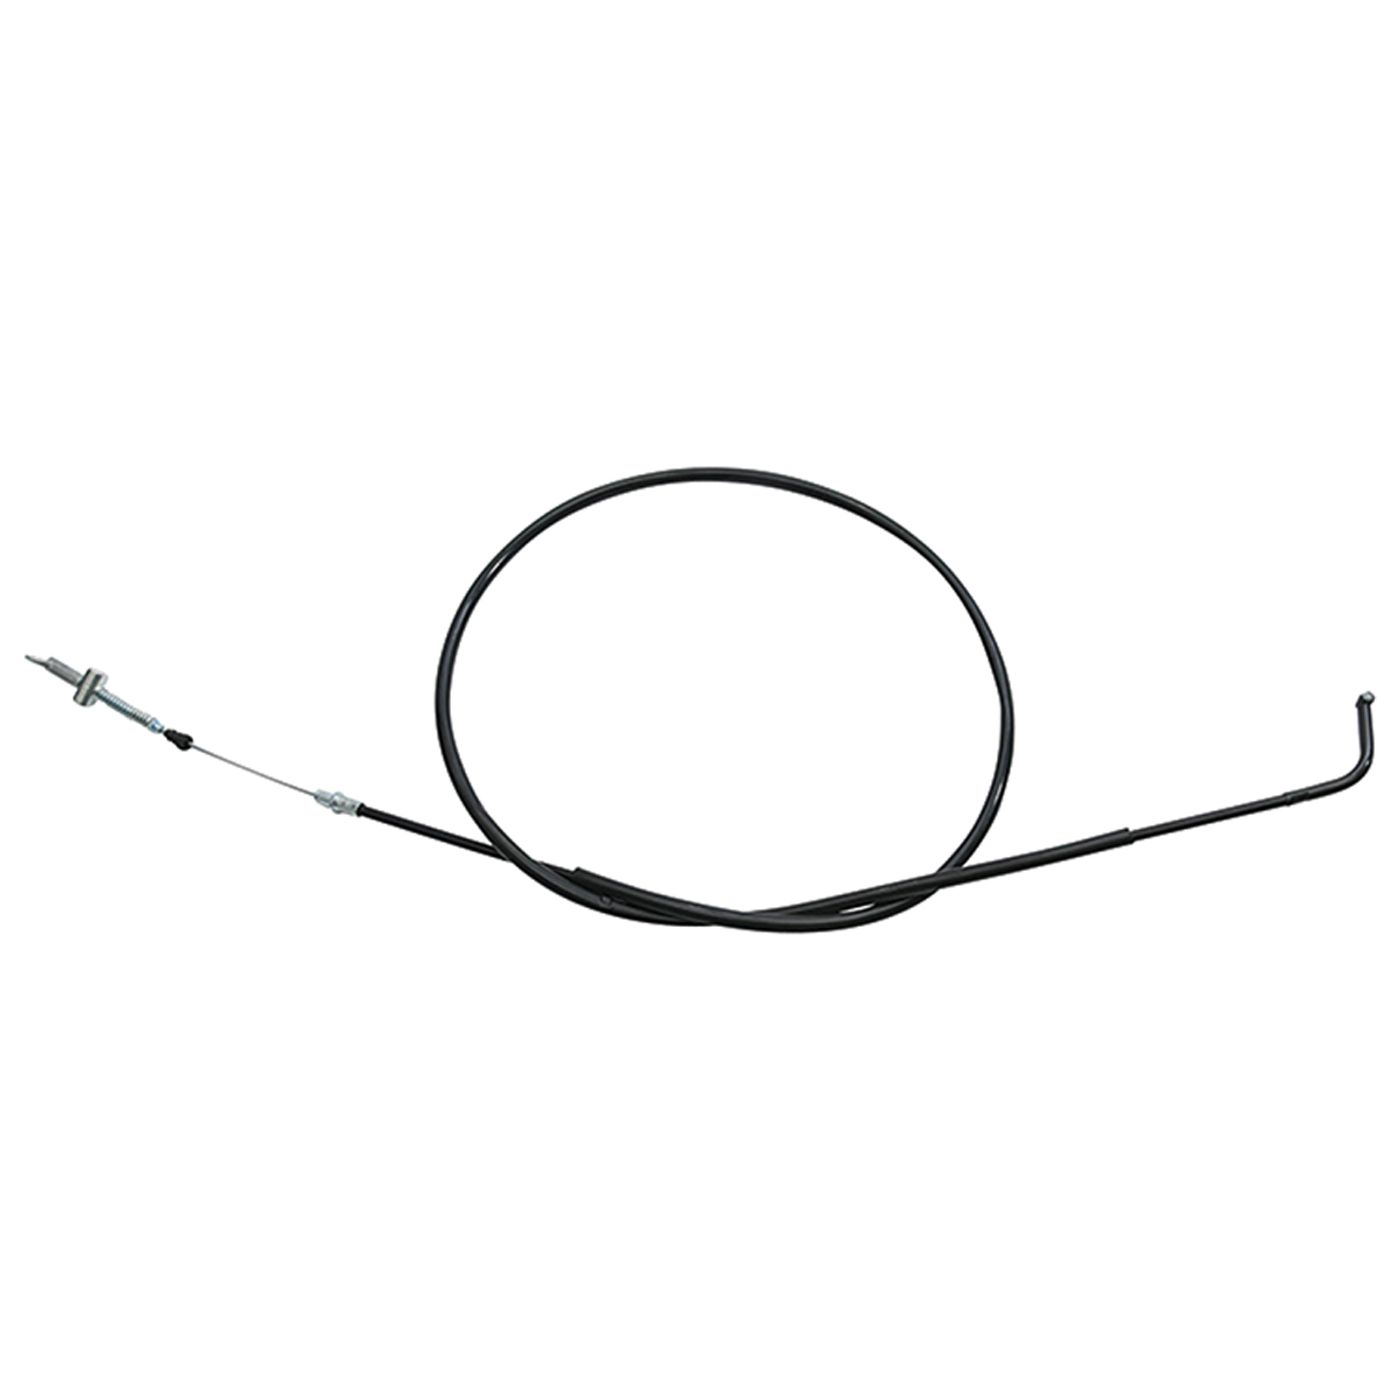 Wrp Brake Cables - WRP454058 image